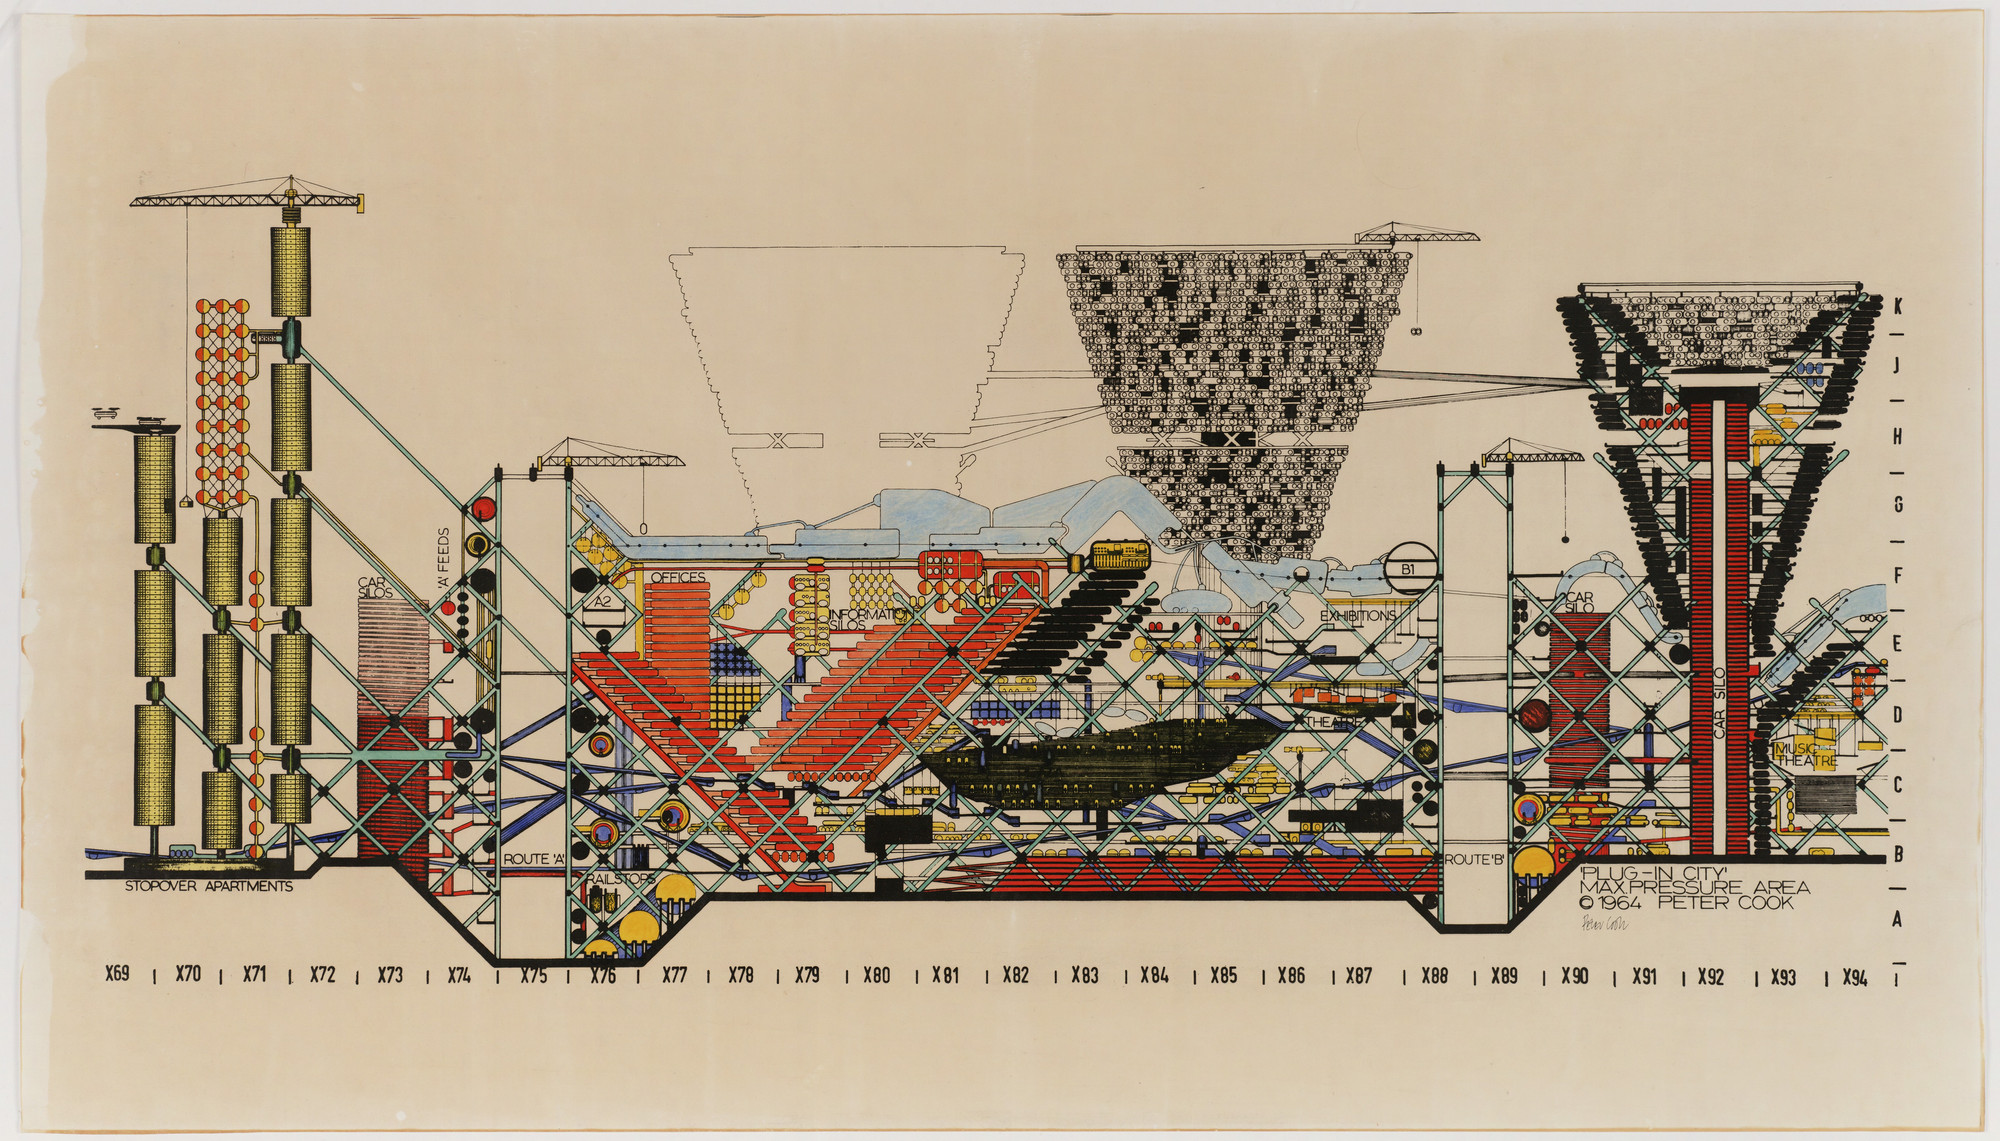 Plug-In_City, Maximum Pressure Area, Long Section. Peter Cook. 1964